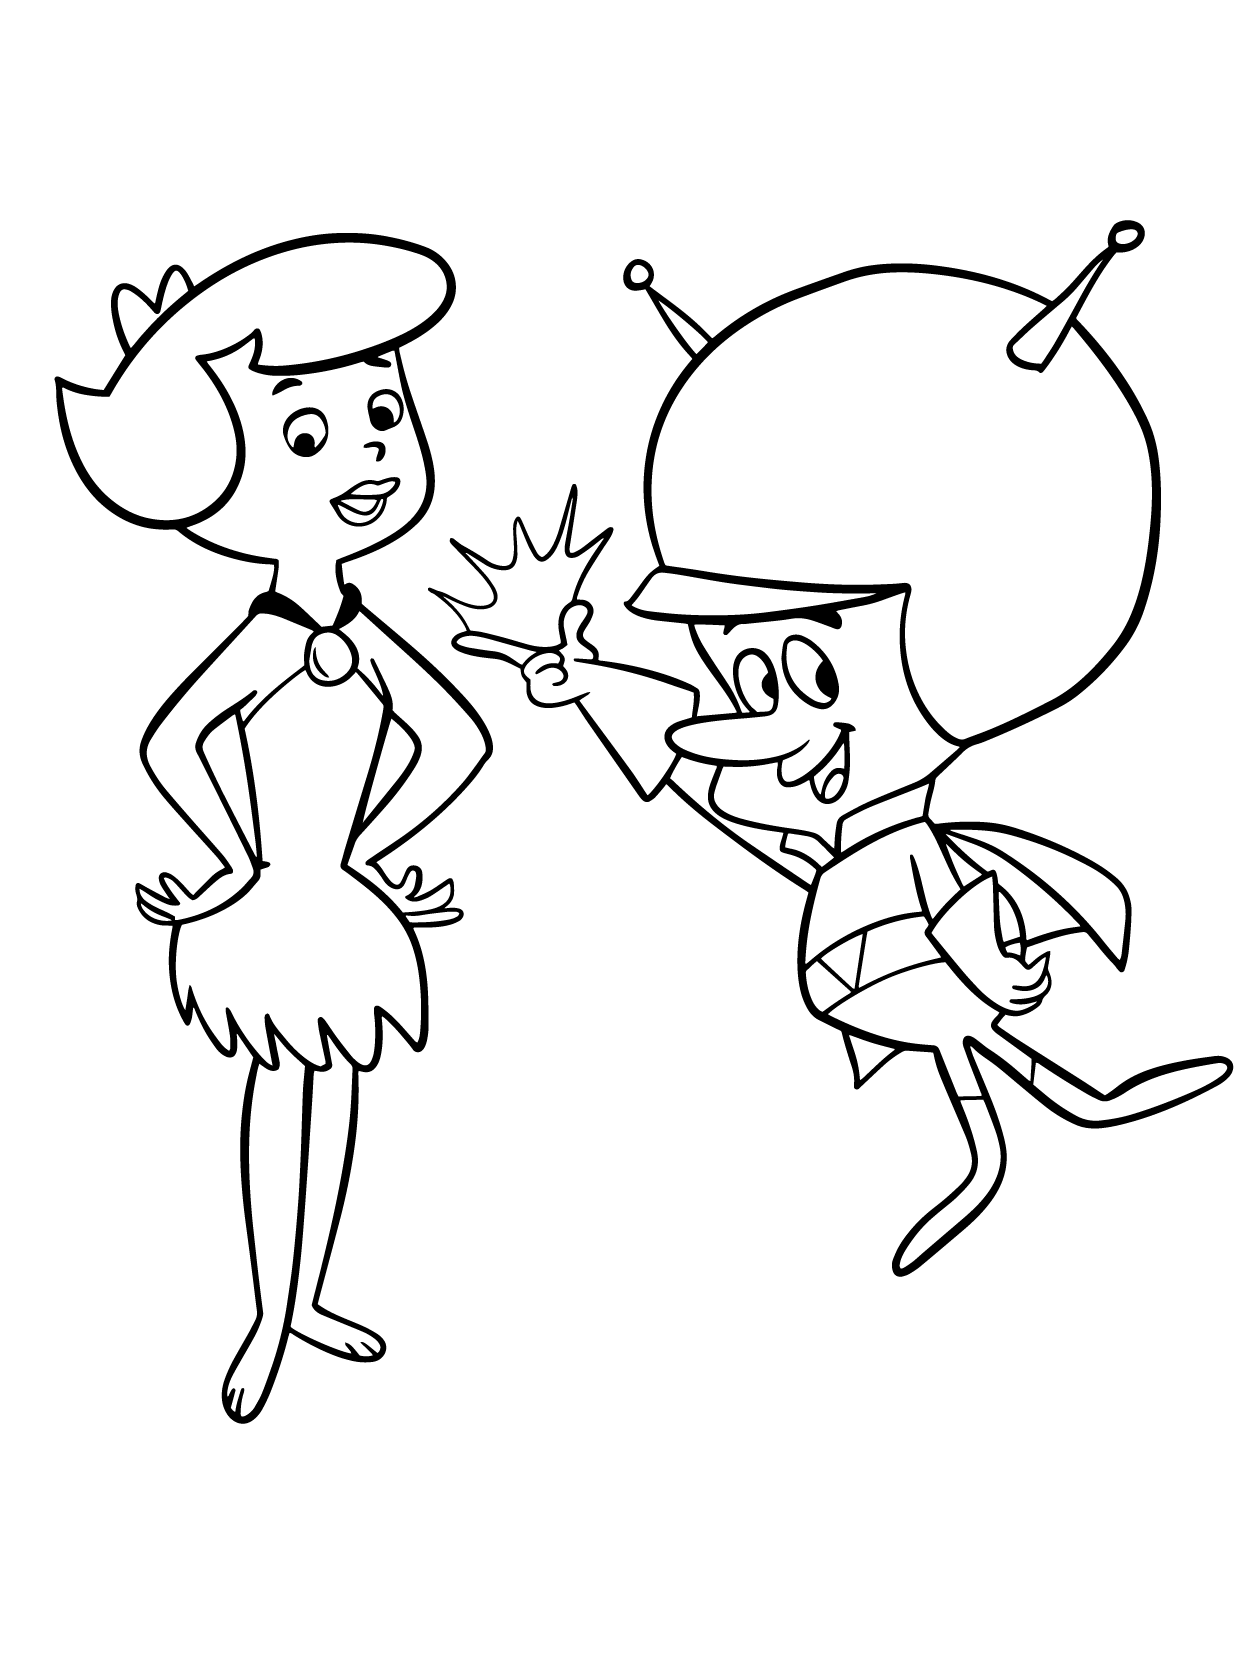 Betty and The Great Gazoo